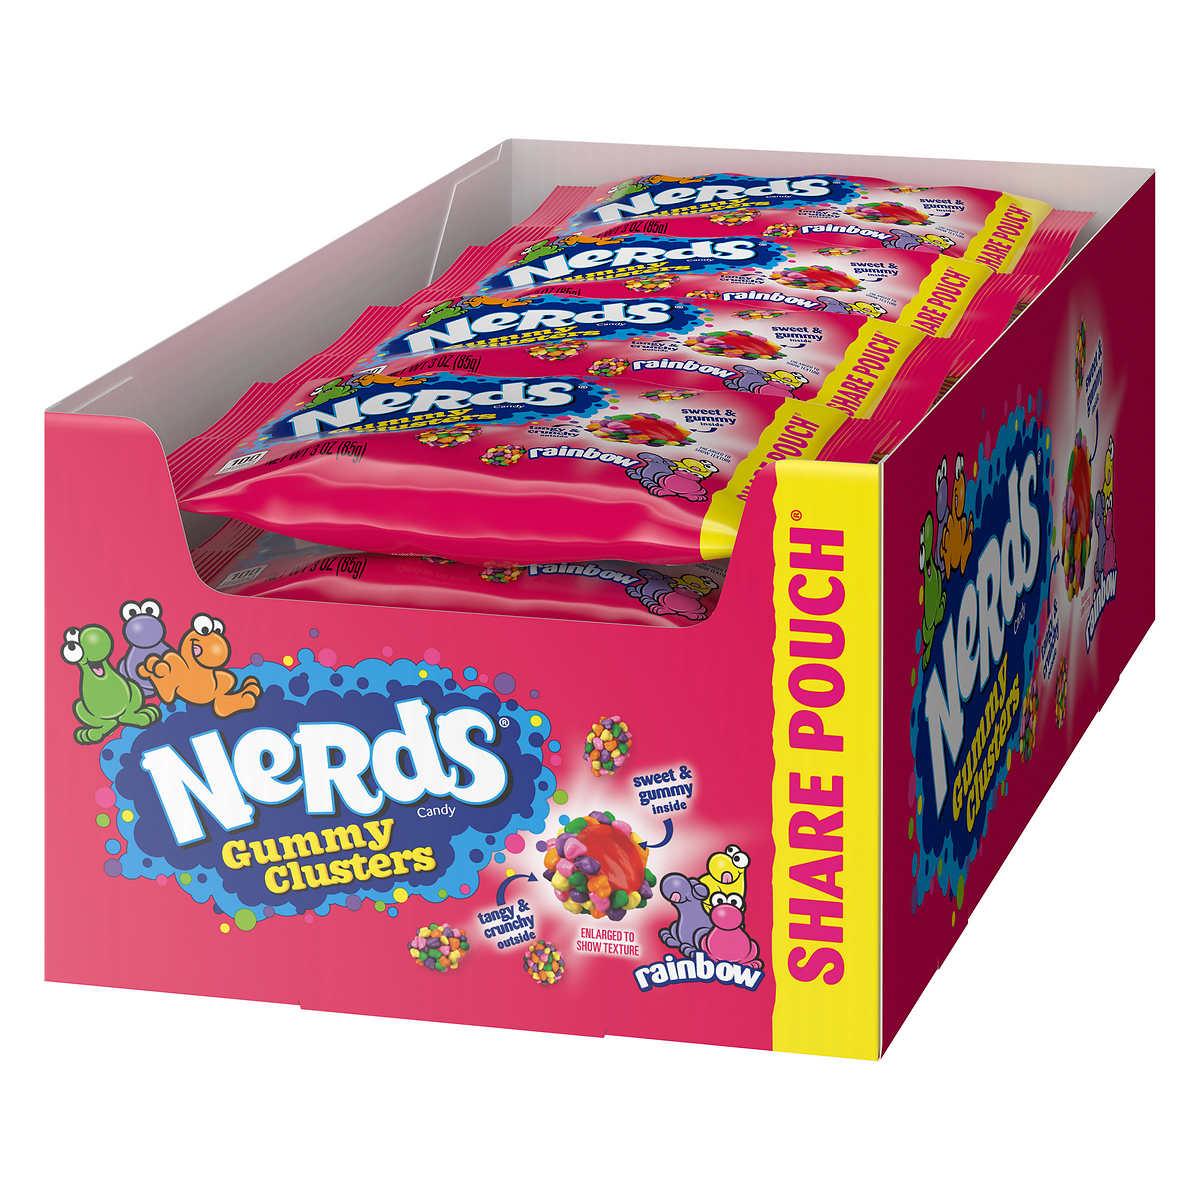 Nerds Candy Gummy Clusters, Rainbow, Share Pouch, 3 oz, 12-count